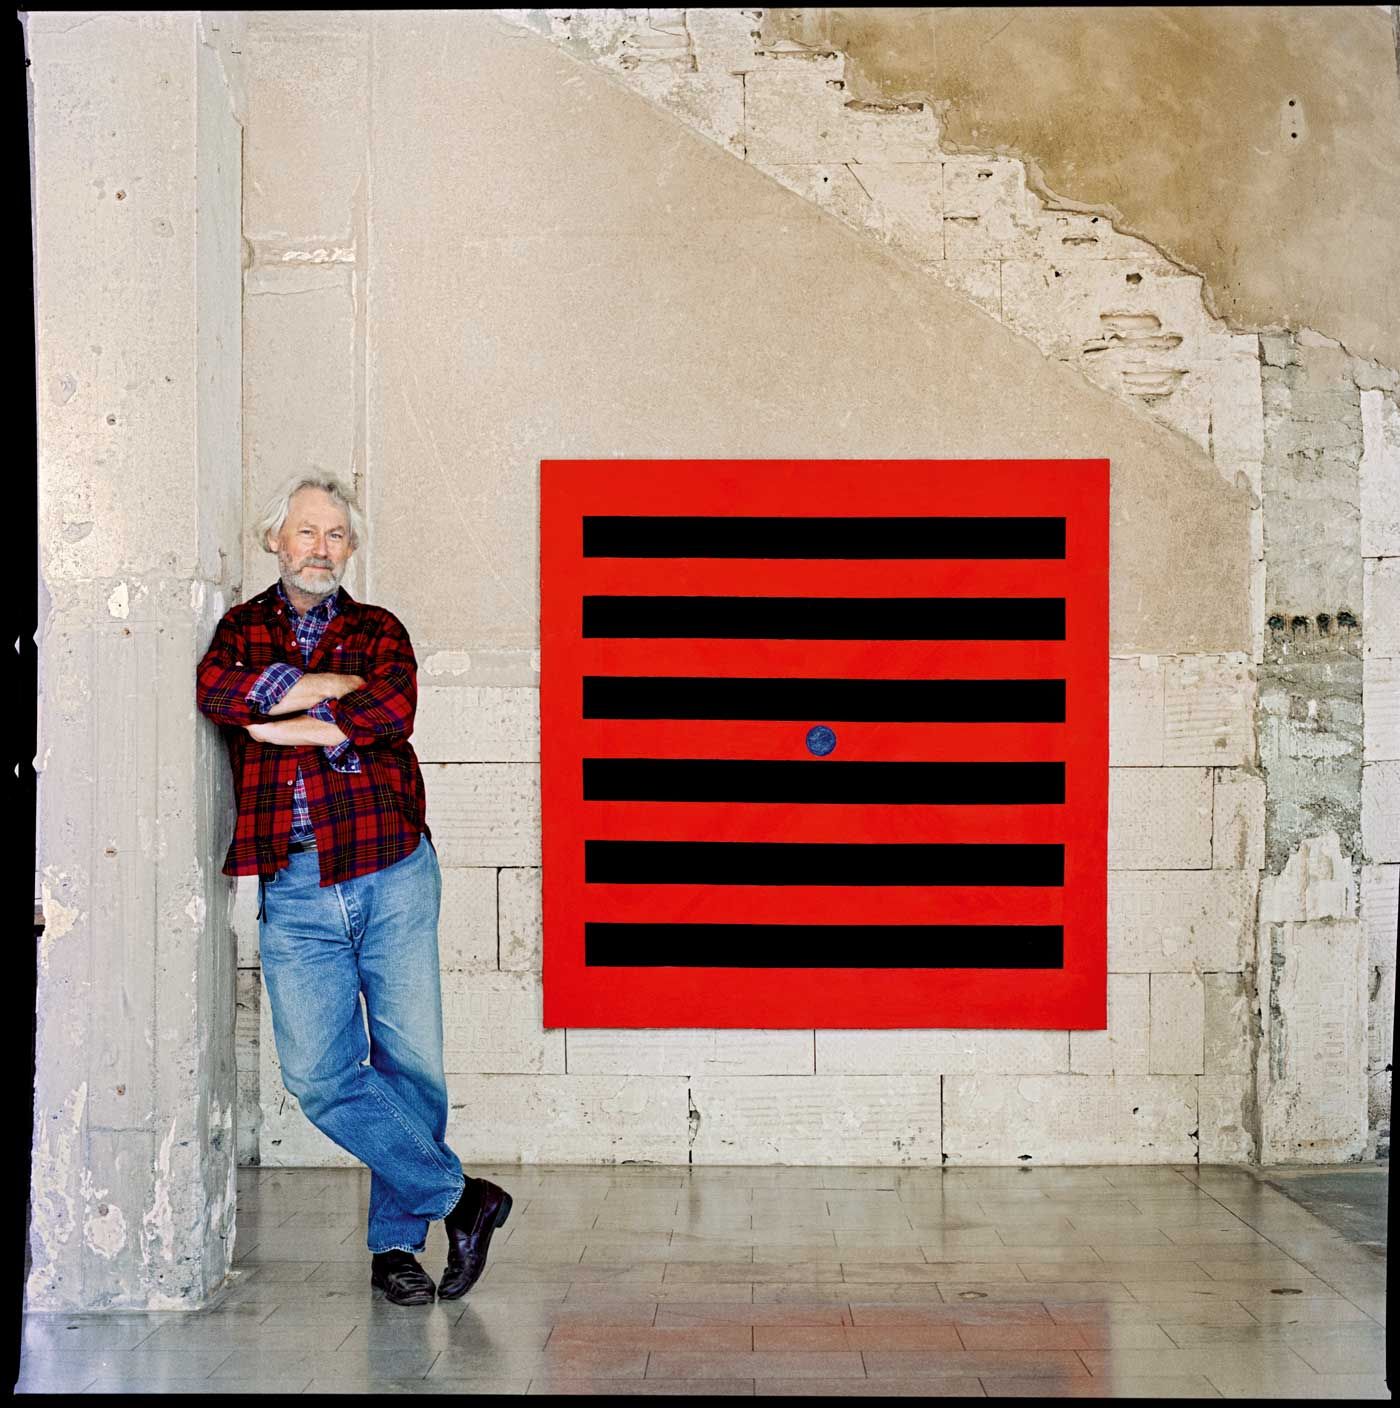 Donald Judd's work measured in time and place